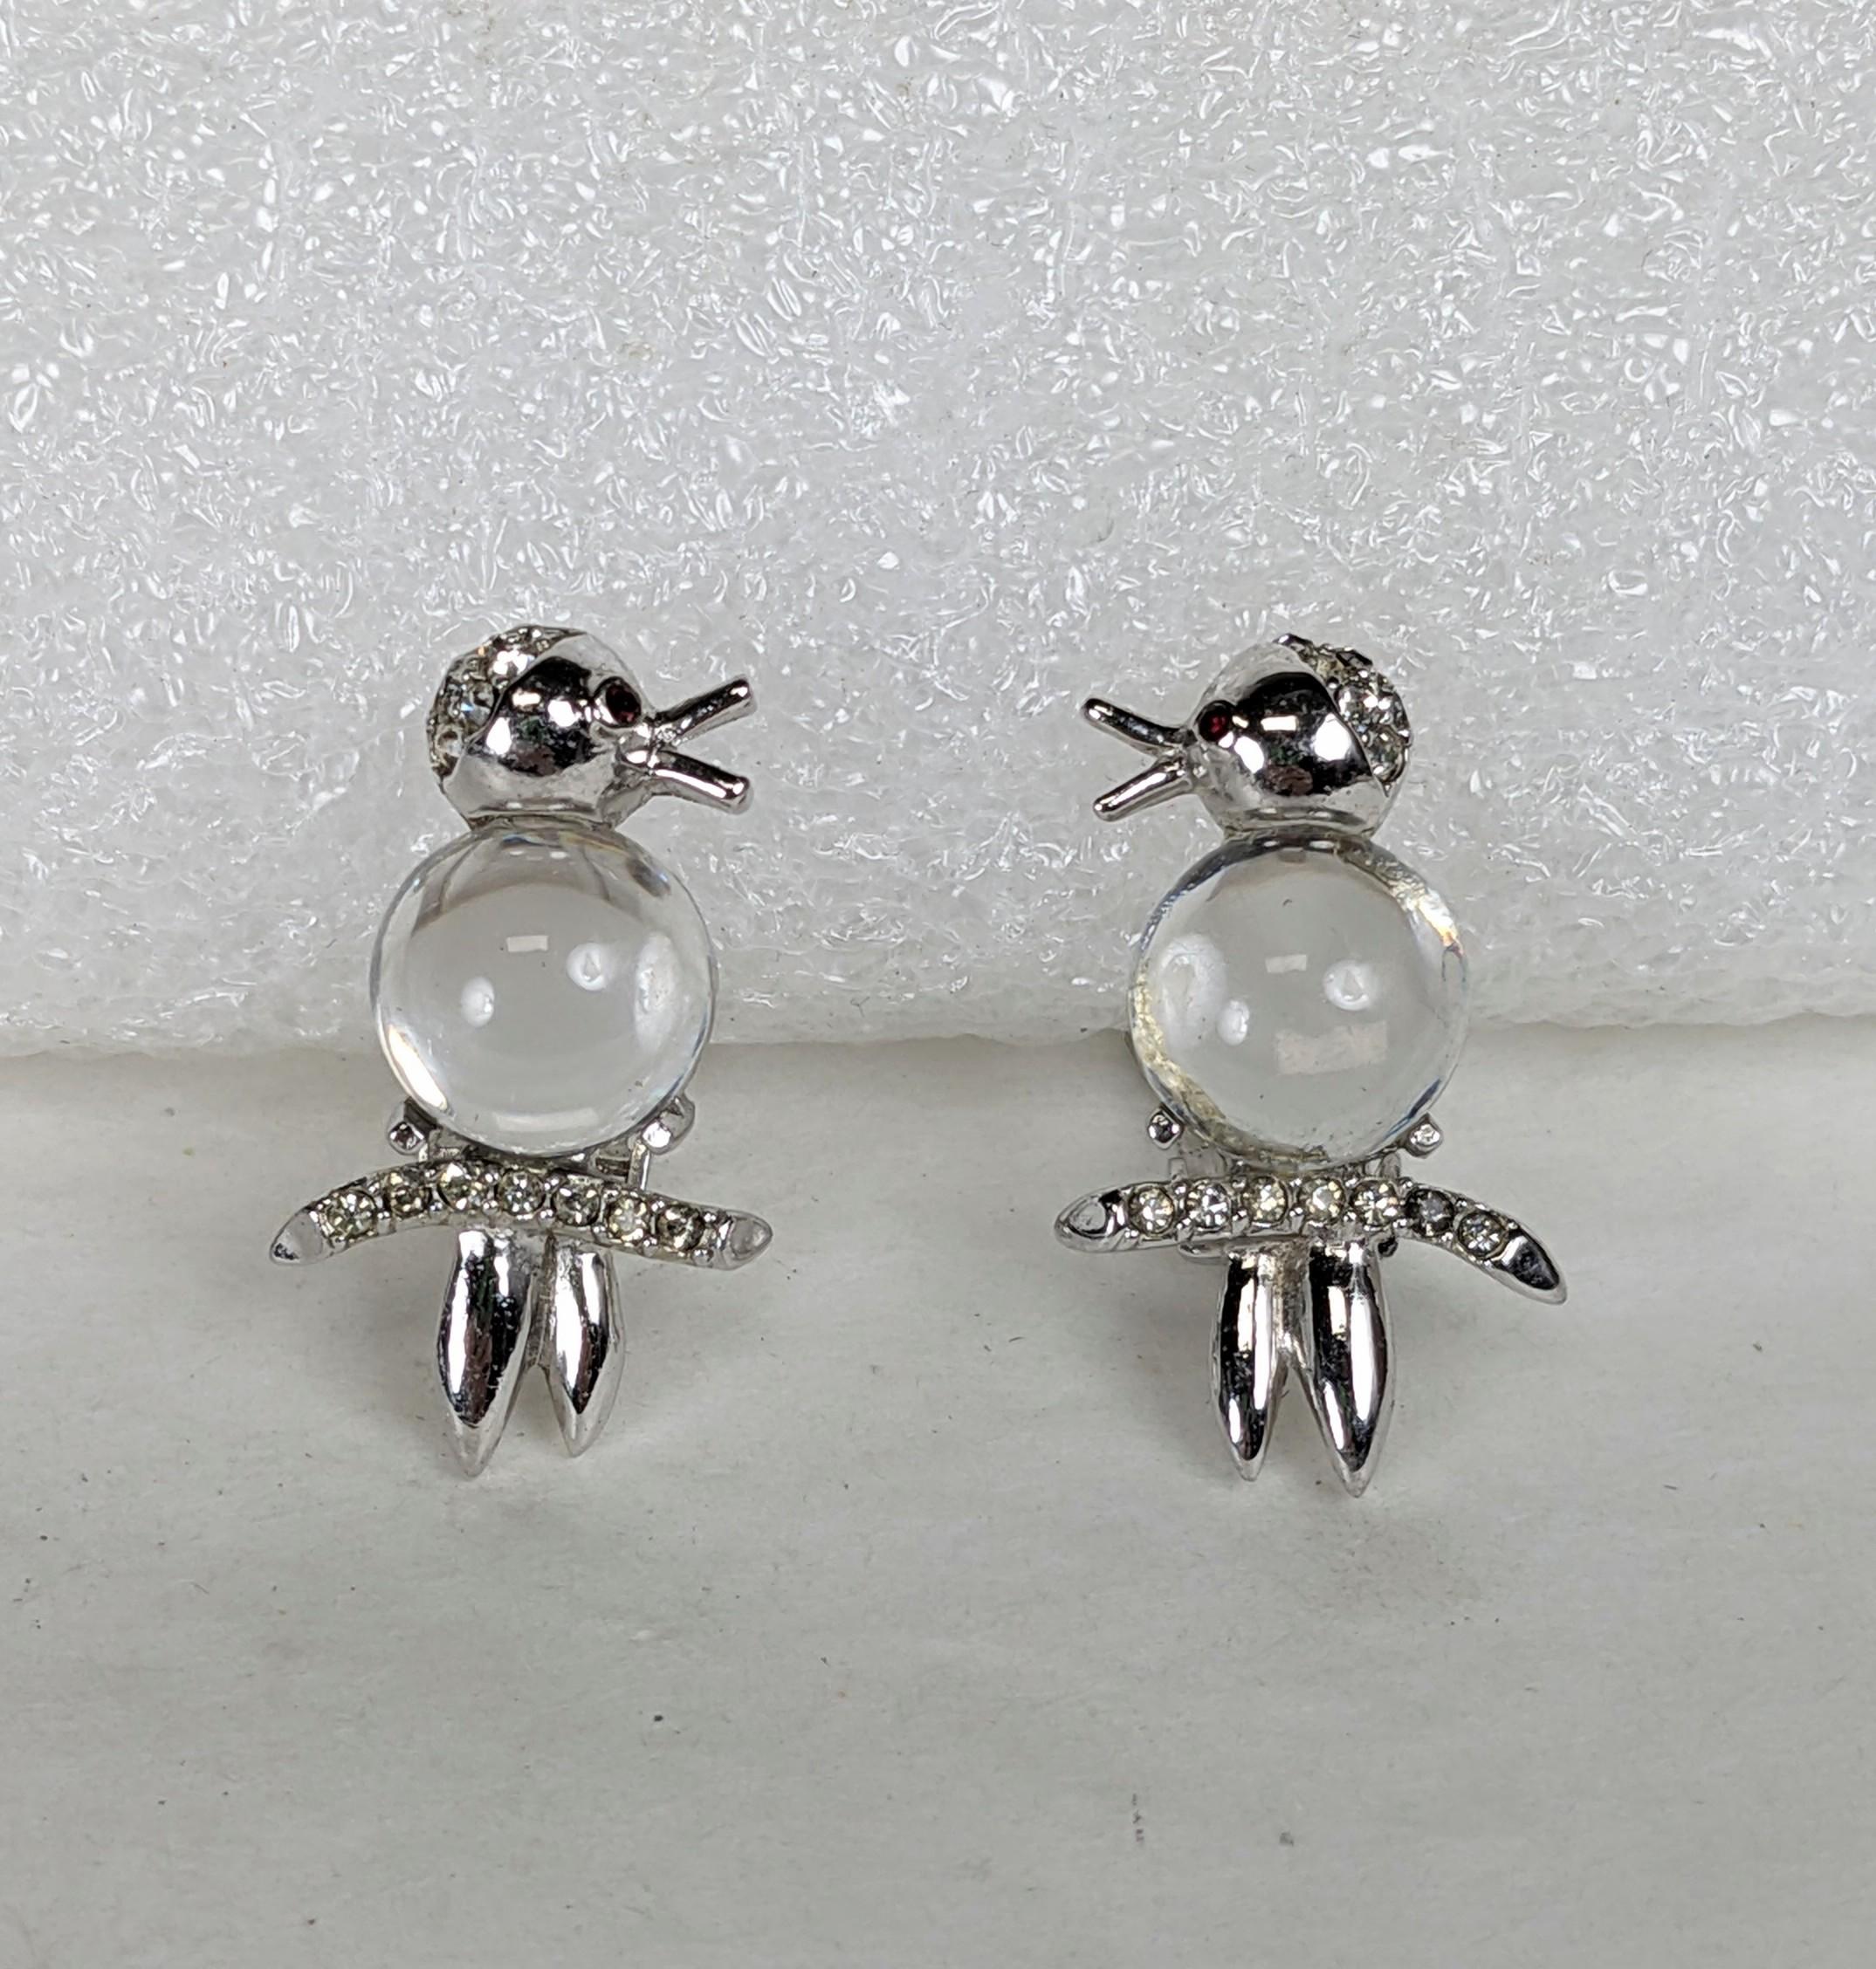 Charming Kramer Jelly Belly Bird Earrings from the 1950's. Tiny birds with pave accents and lucite jelly belly. Clip back fittings, rhodium finish. 1